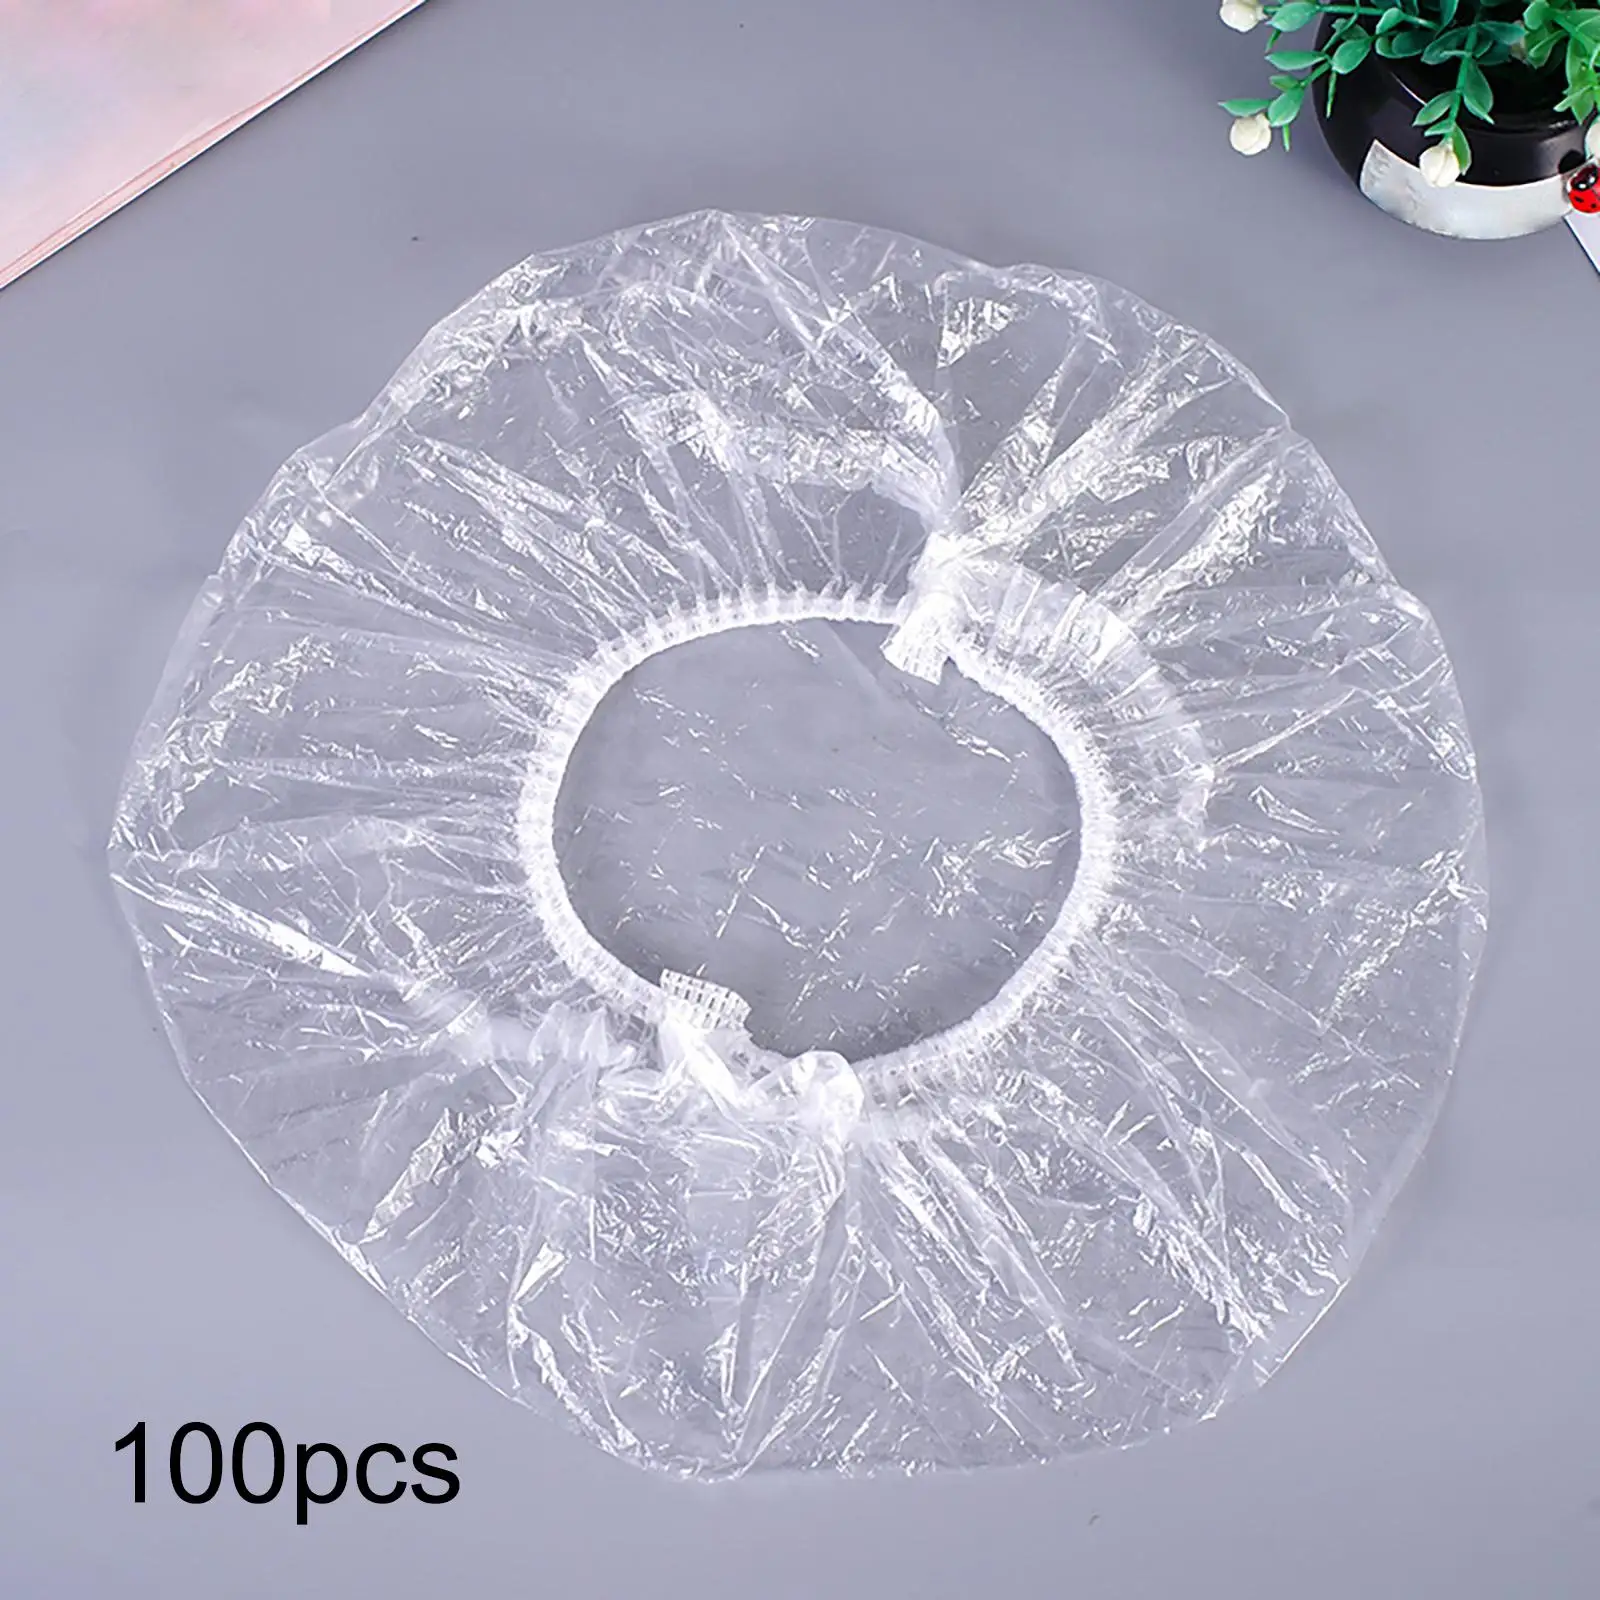 100Pcs Disposable Shower Caps Multipurpose White Waterproof Hair Caps Bath Caps for Home SPA Bathing Conditioning Unisex Adults